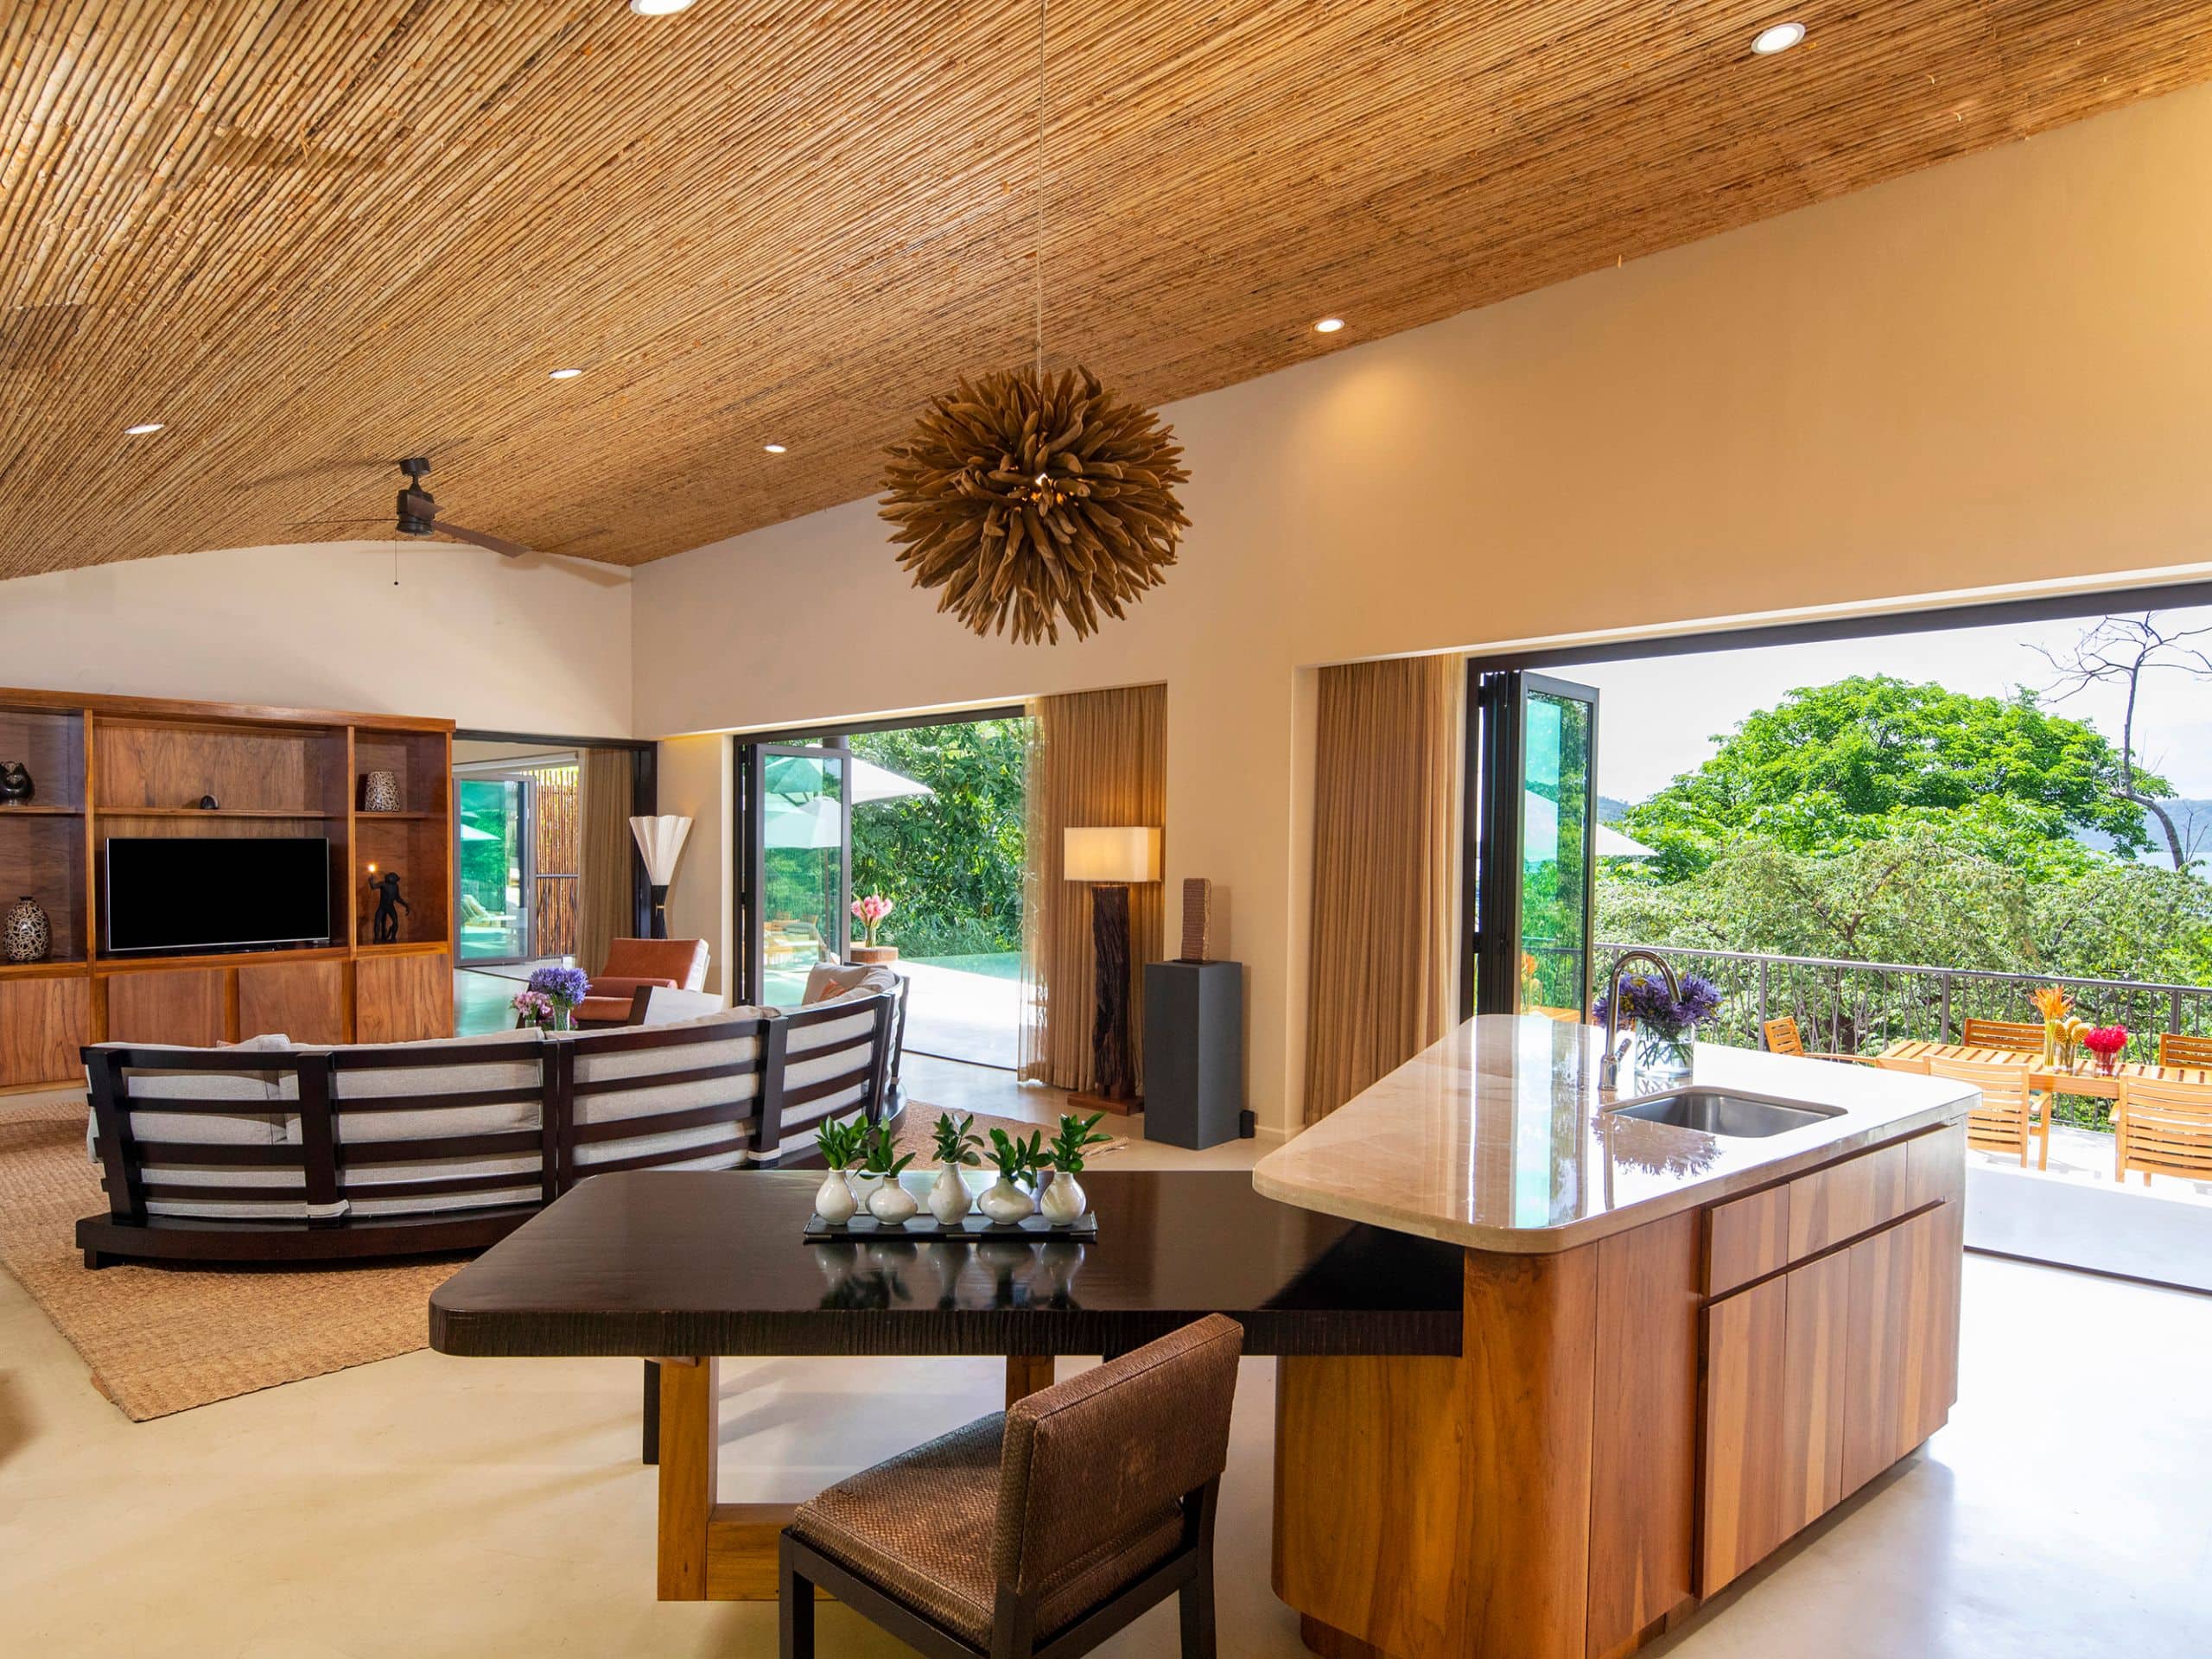 Andaz Costa Rica Resort at Peninsula Papagayo Presidential Suite Living Room Kitchen